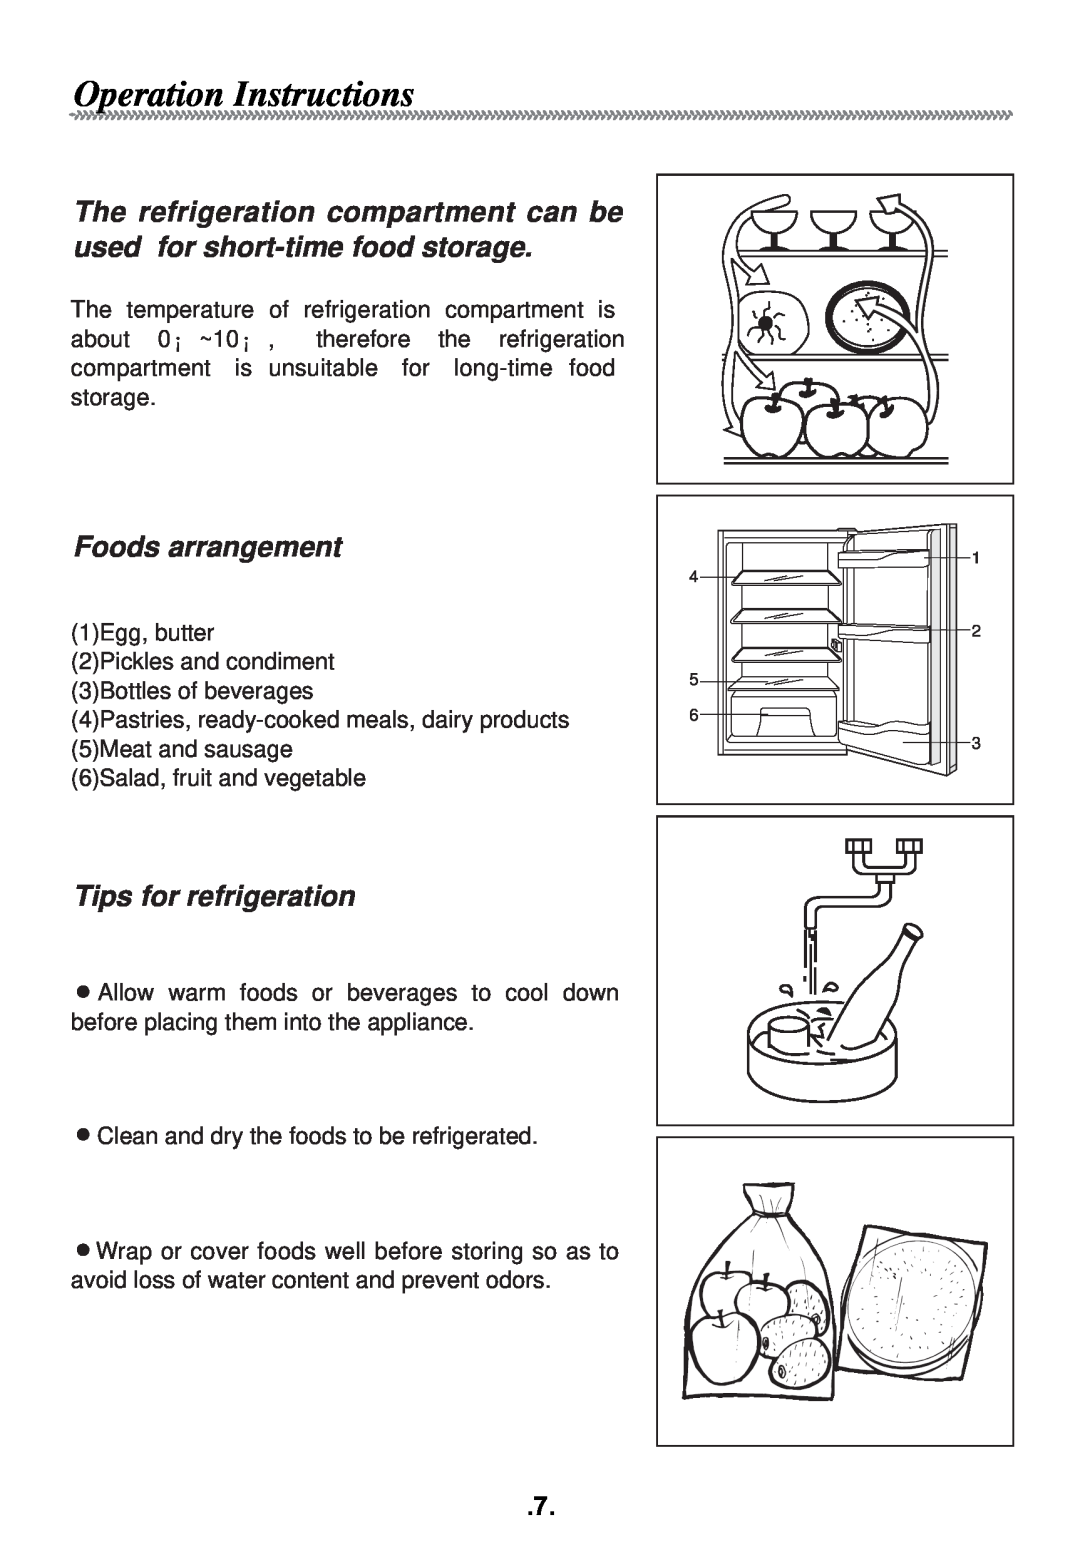 Haier HR-135AR/A manual Operation Instructions, The refrigeration compartment can be used for short-time food storage 